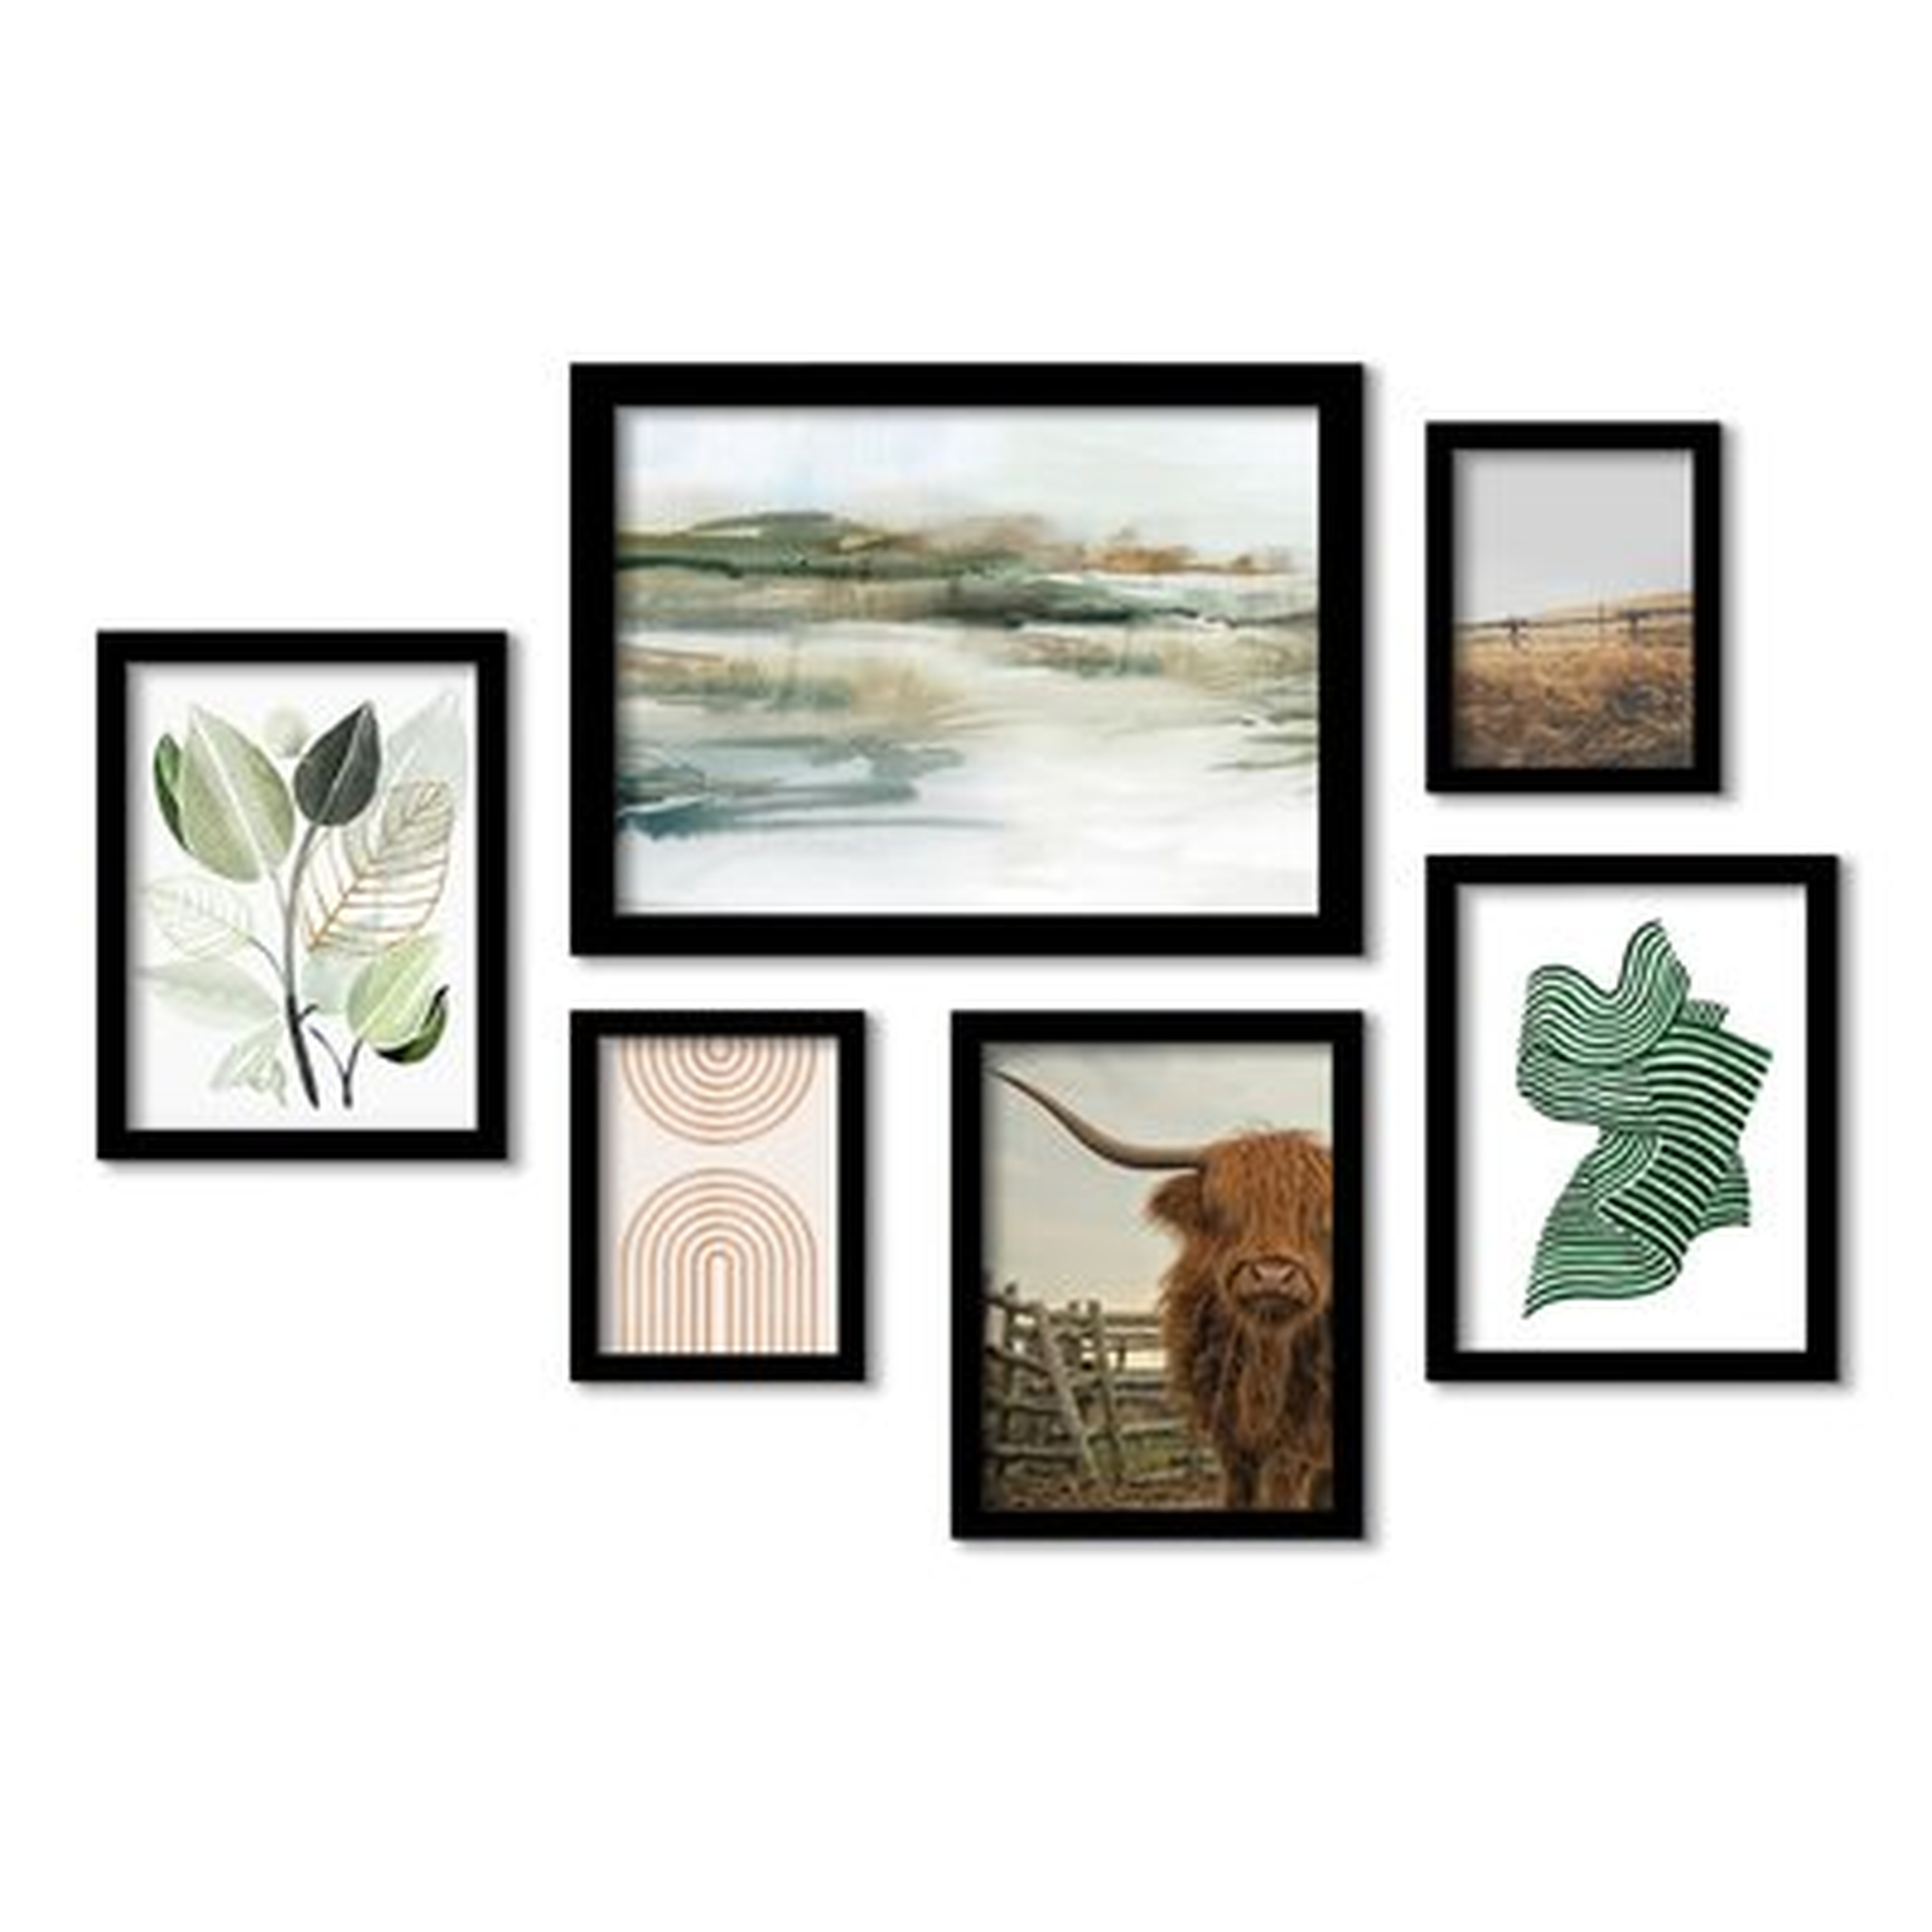 Only for a Moment Coastal by PI Creative - 6 Piece Picture Frame Print Set on Paper - Wayfair